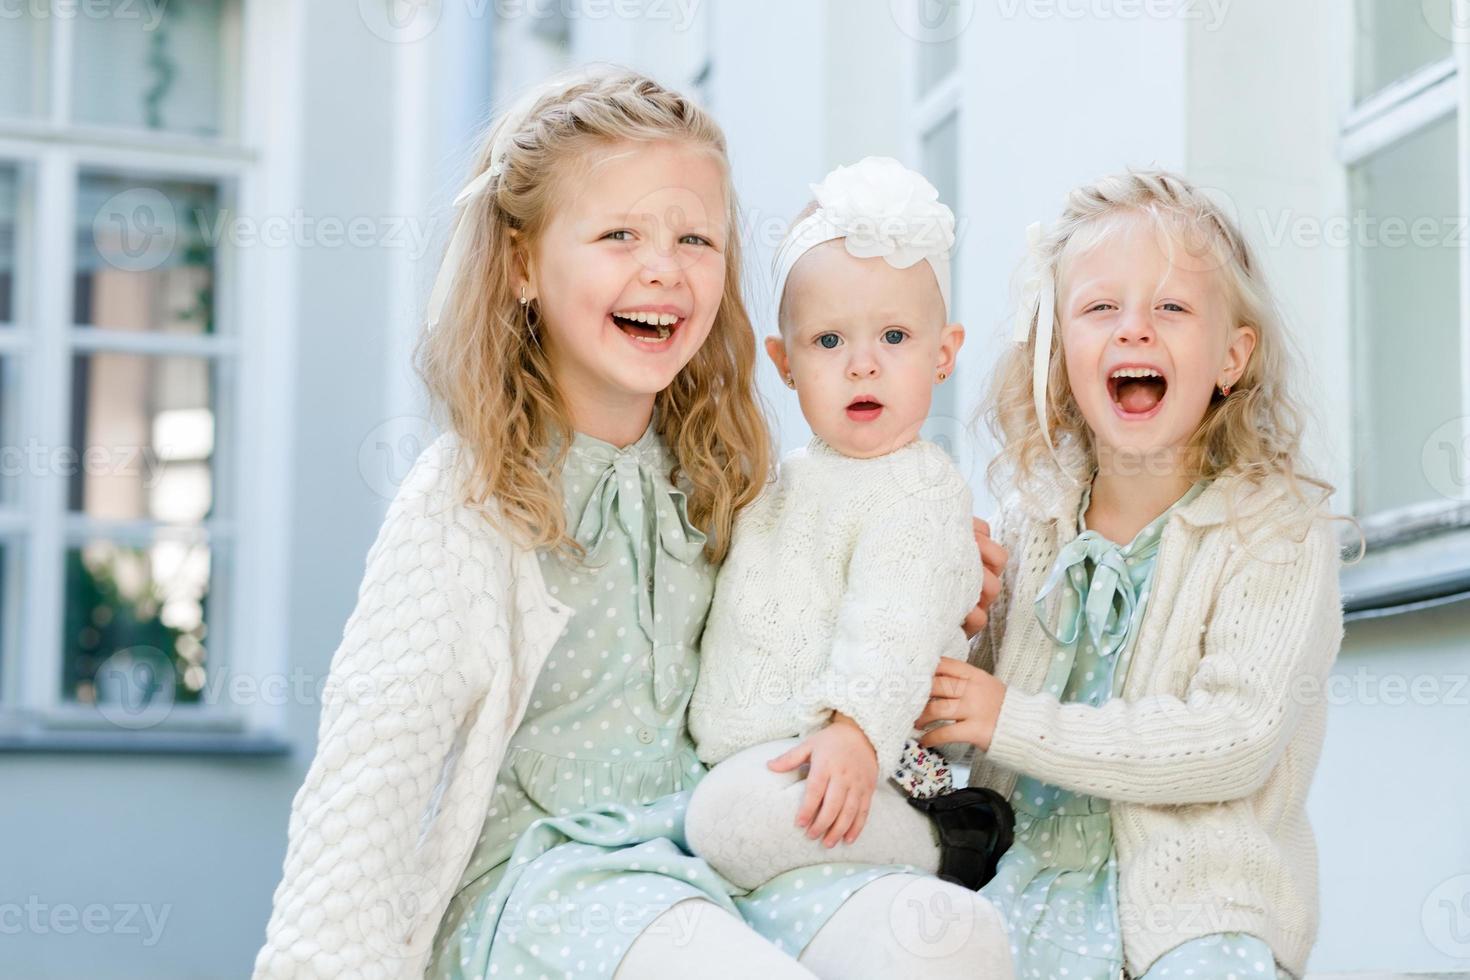 3 little girls with light hair are hugging. Love of sisters photo